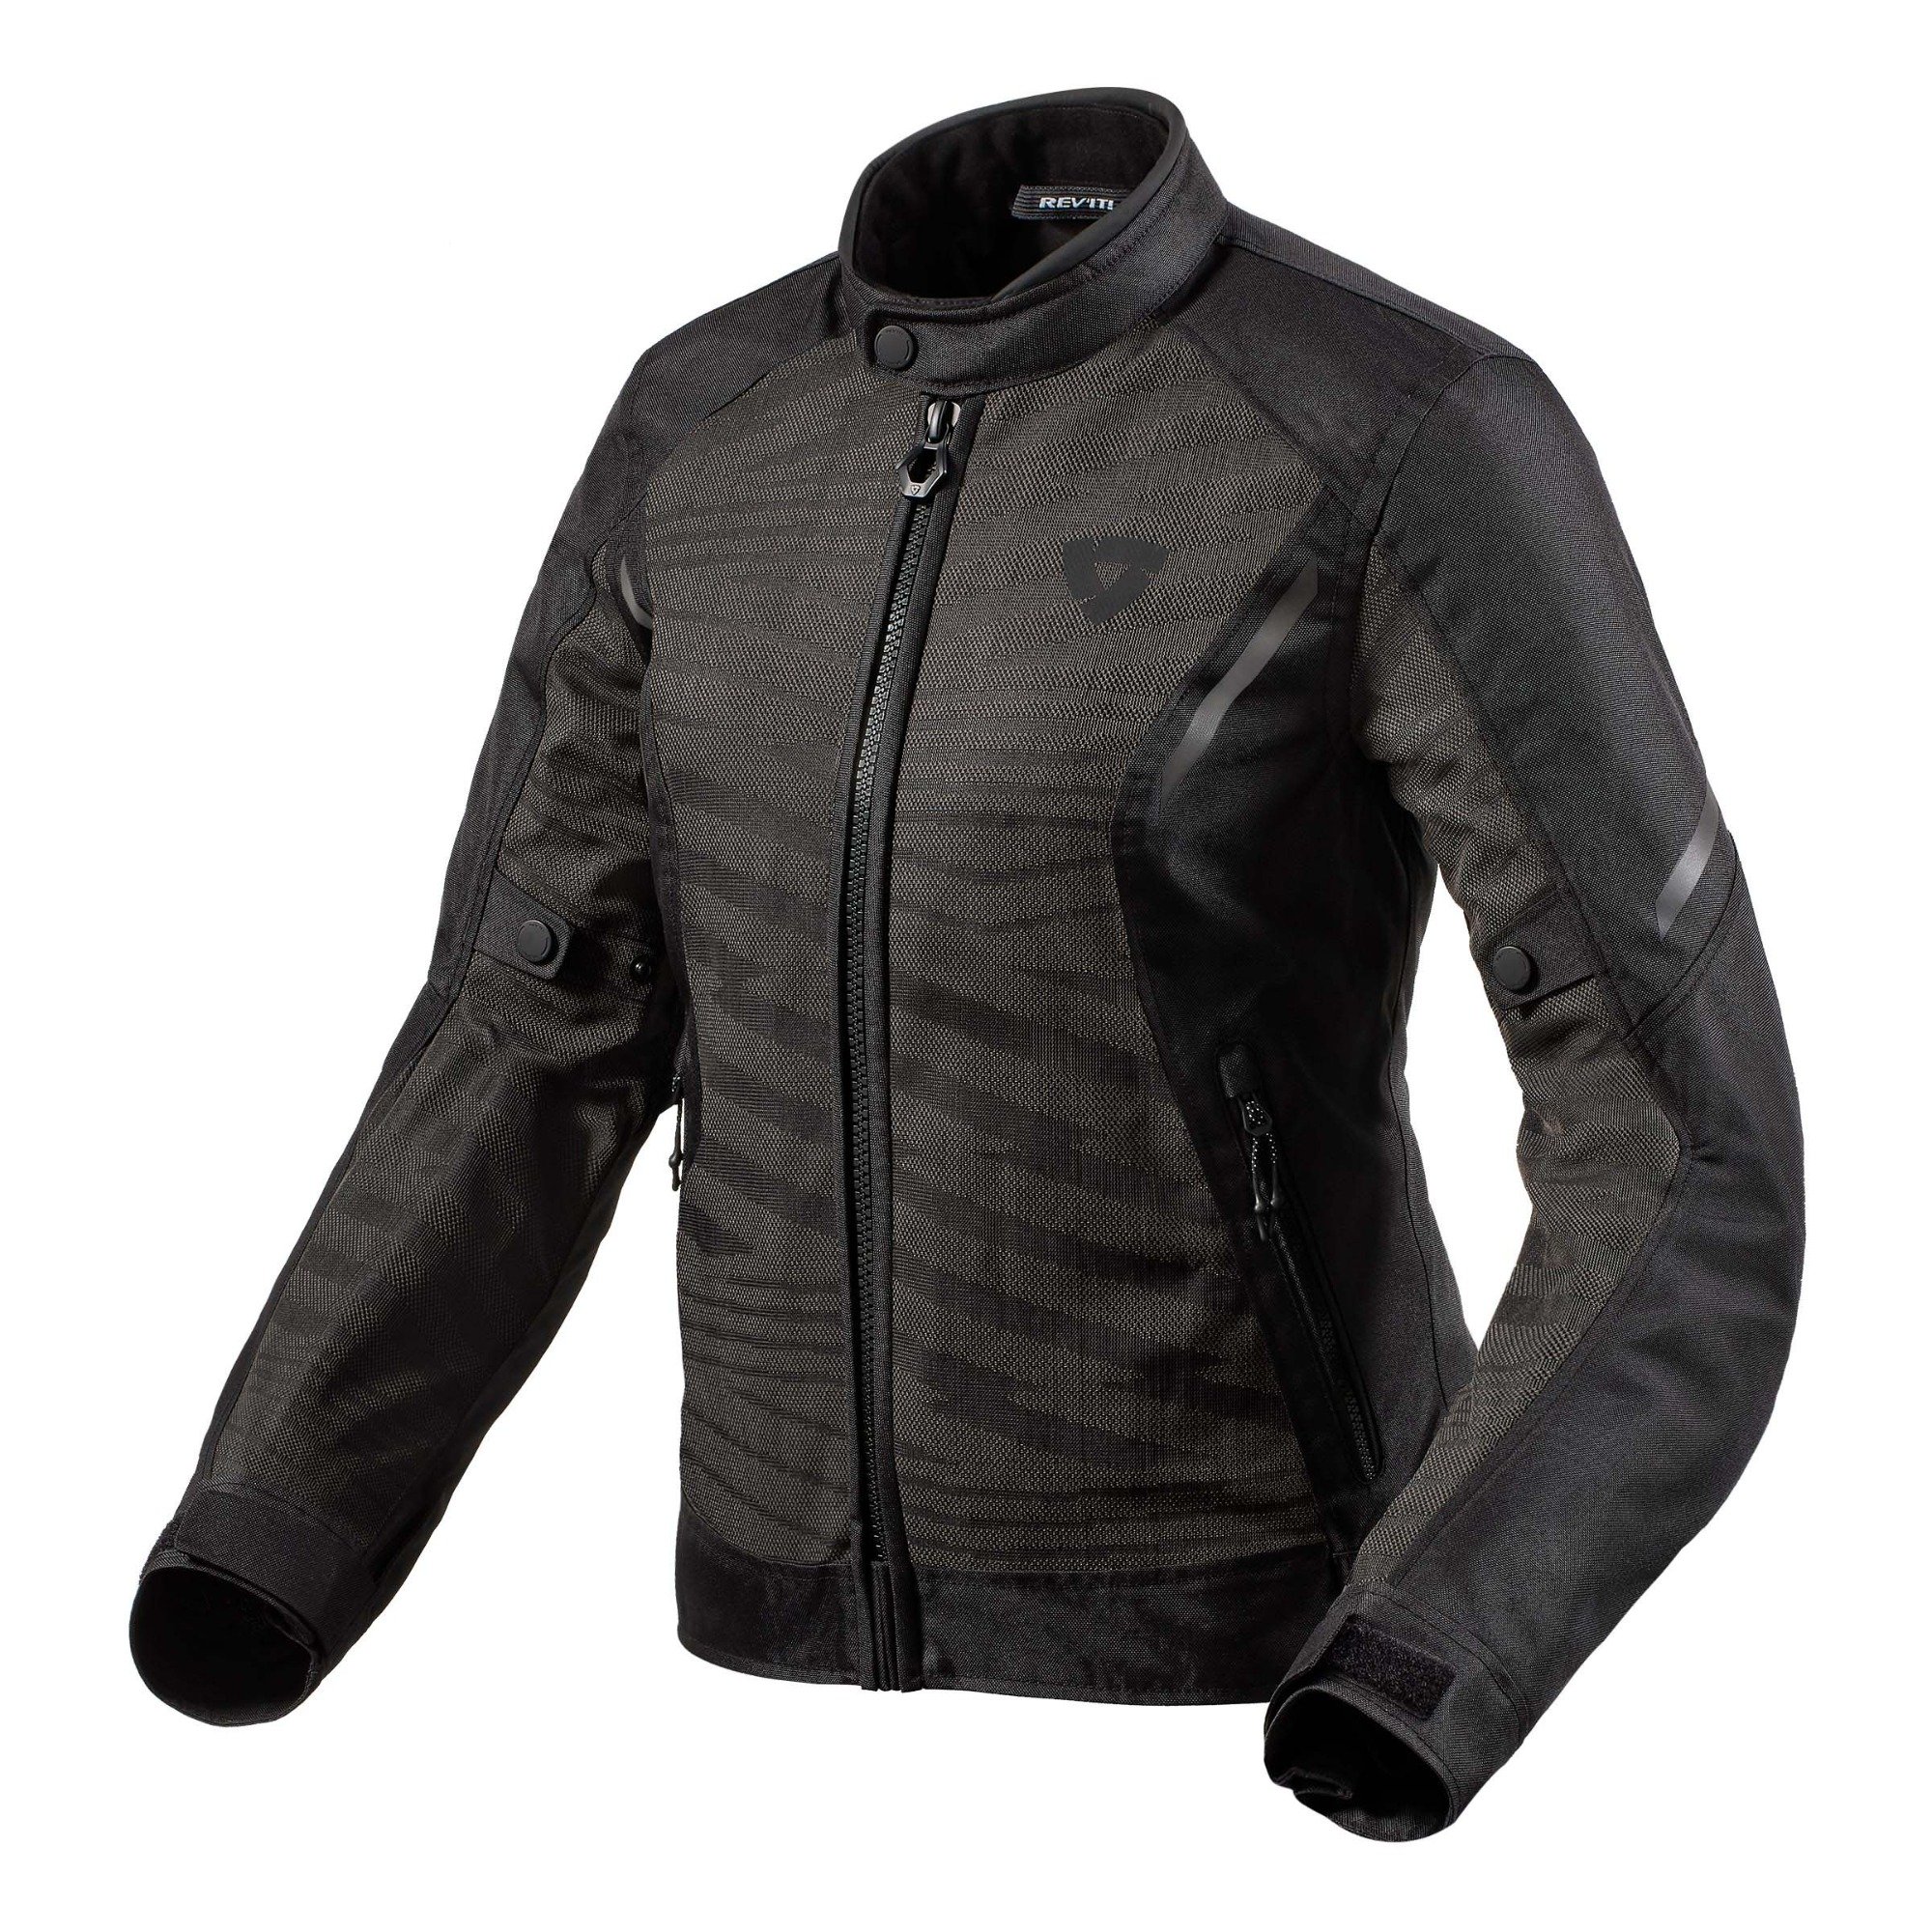 Image of REV'IT! Torque 2 H2O Jacket Lady Black Anthracite Size 36 ID 8700001345507